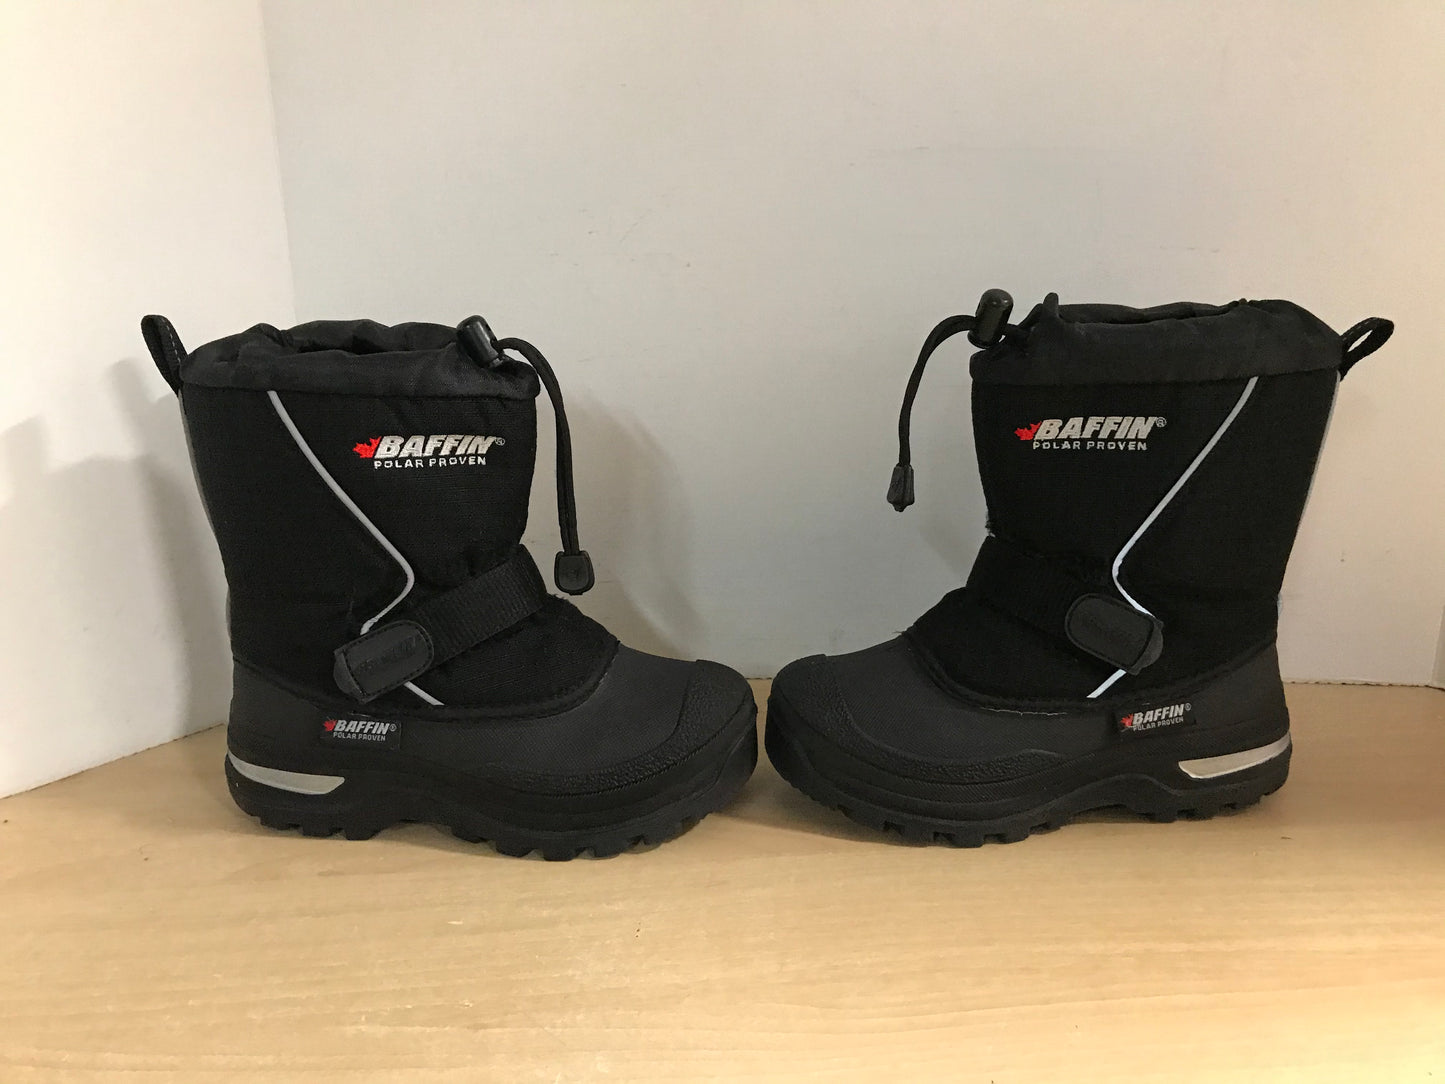 Winter Boots Child Size 1 Baffin With Liner Black Grey Outstanding Quality